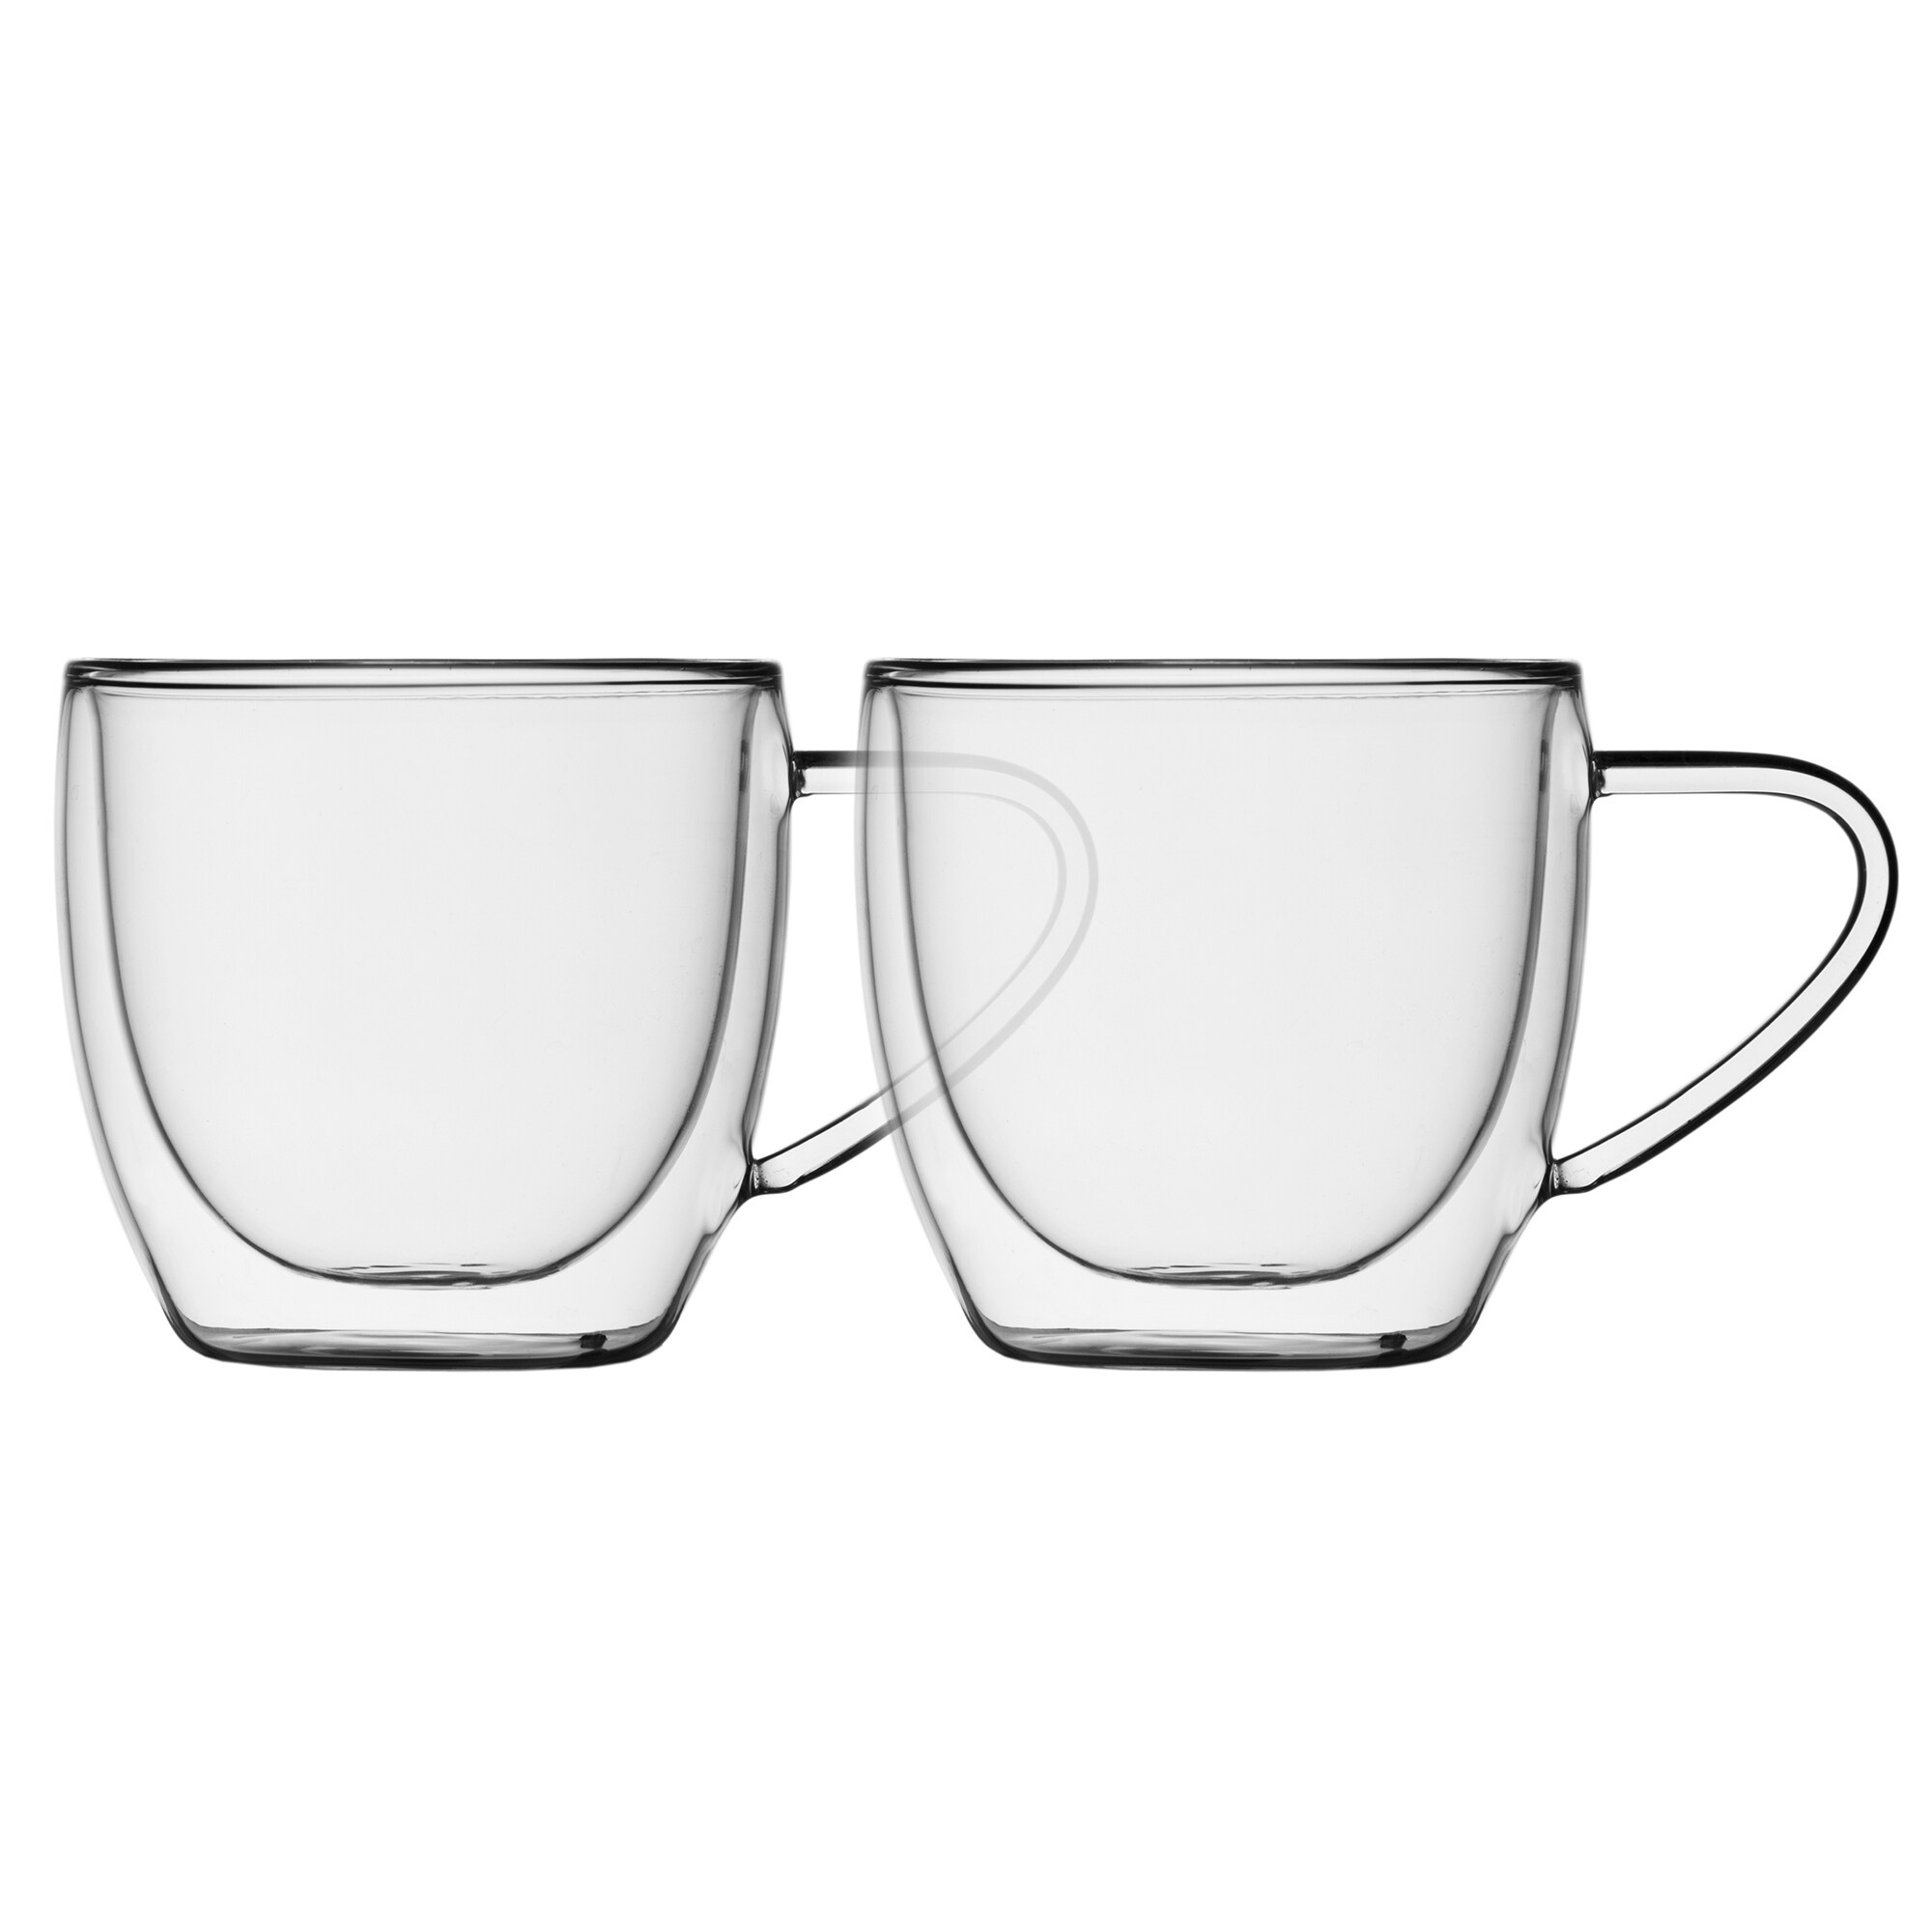 https://ak1.ostkcdn.com/images/products/is/images/direct/54d2f6597f40a12e7ca45305e0f9ed63c7d87cbc/Insulated-Double-Wall-Mug-Cup-Glass-Set-of-4-Mugs-Cups-Thermal%2C225ml.jpg